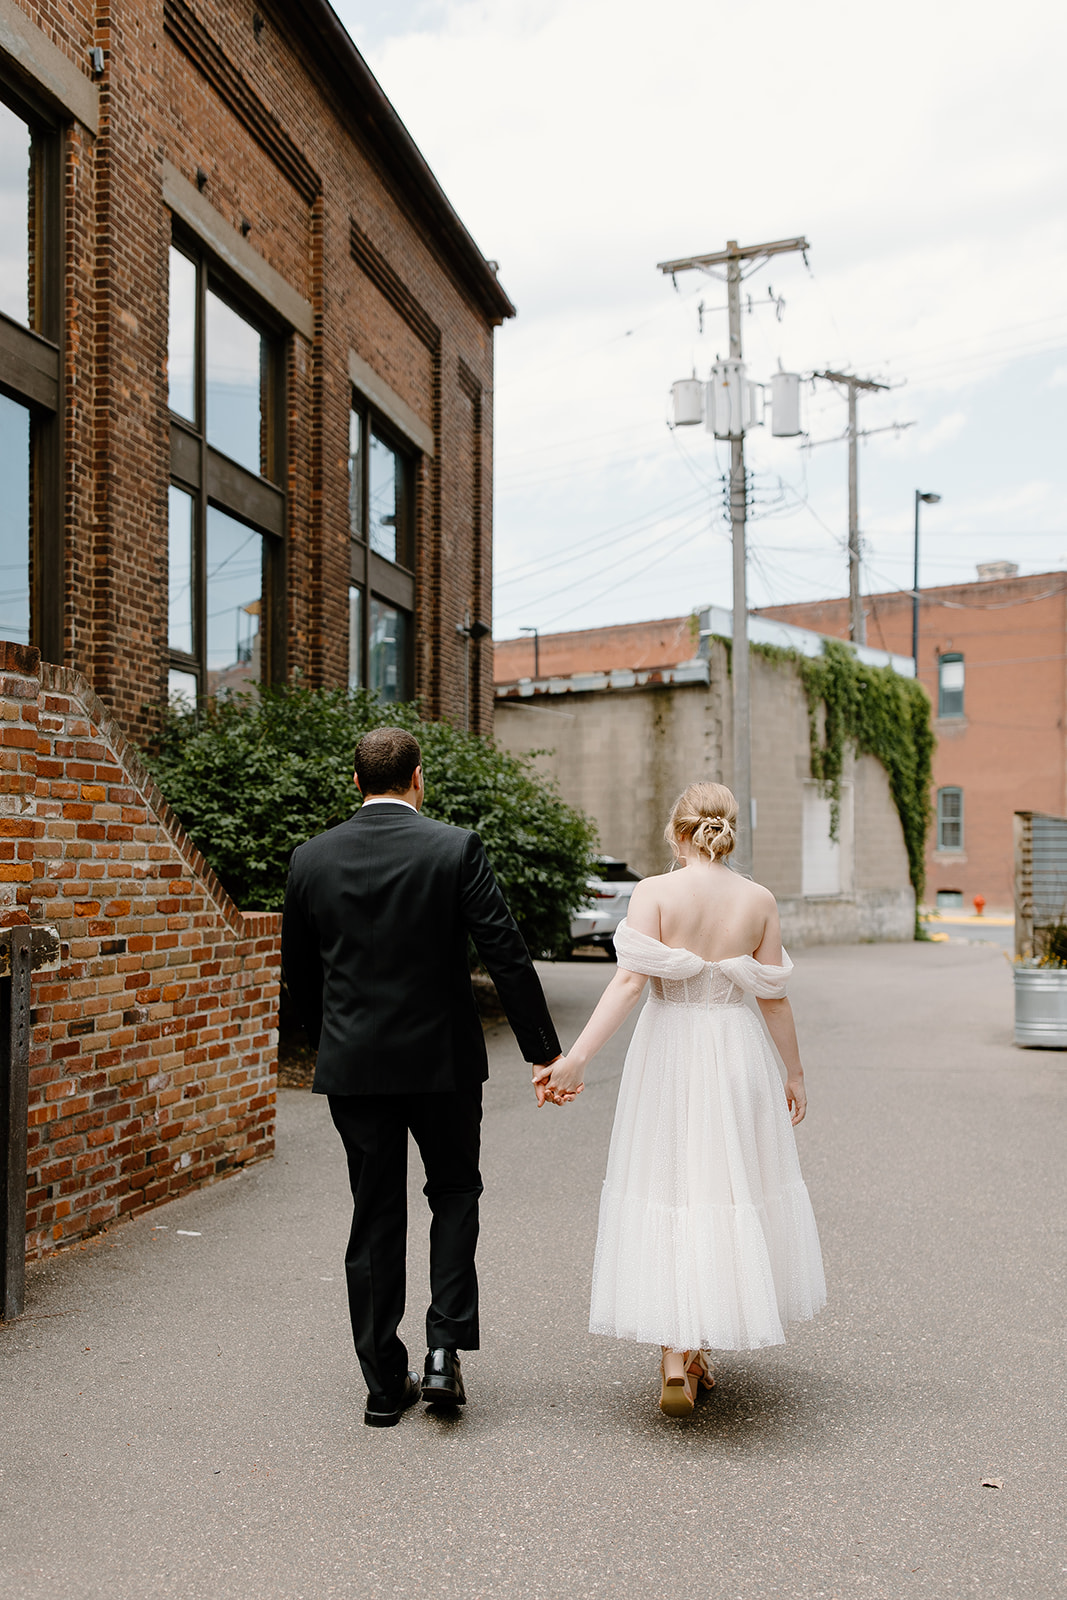 Bride and groom hold hands and walk through an alley